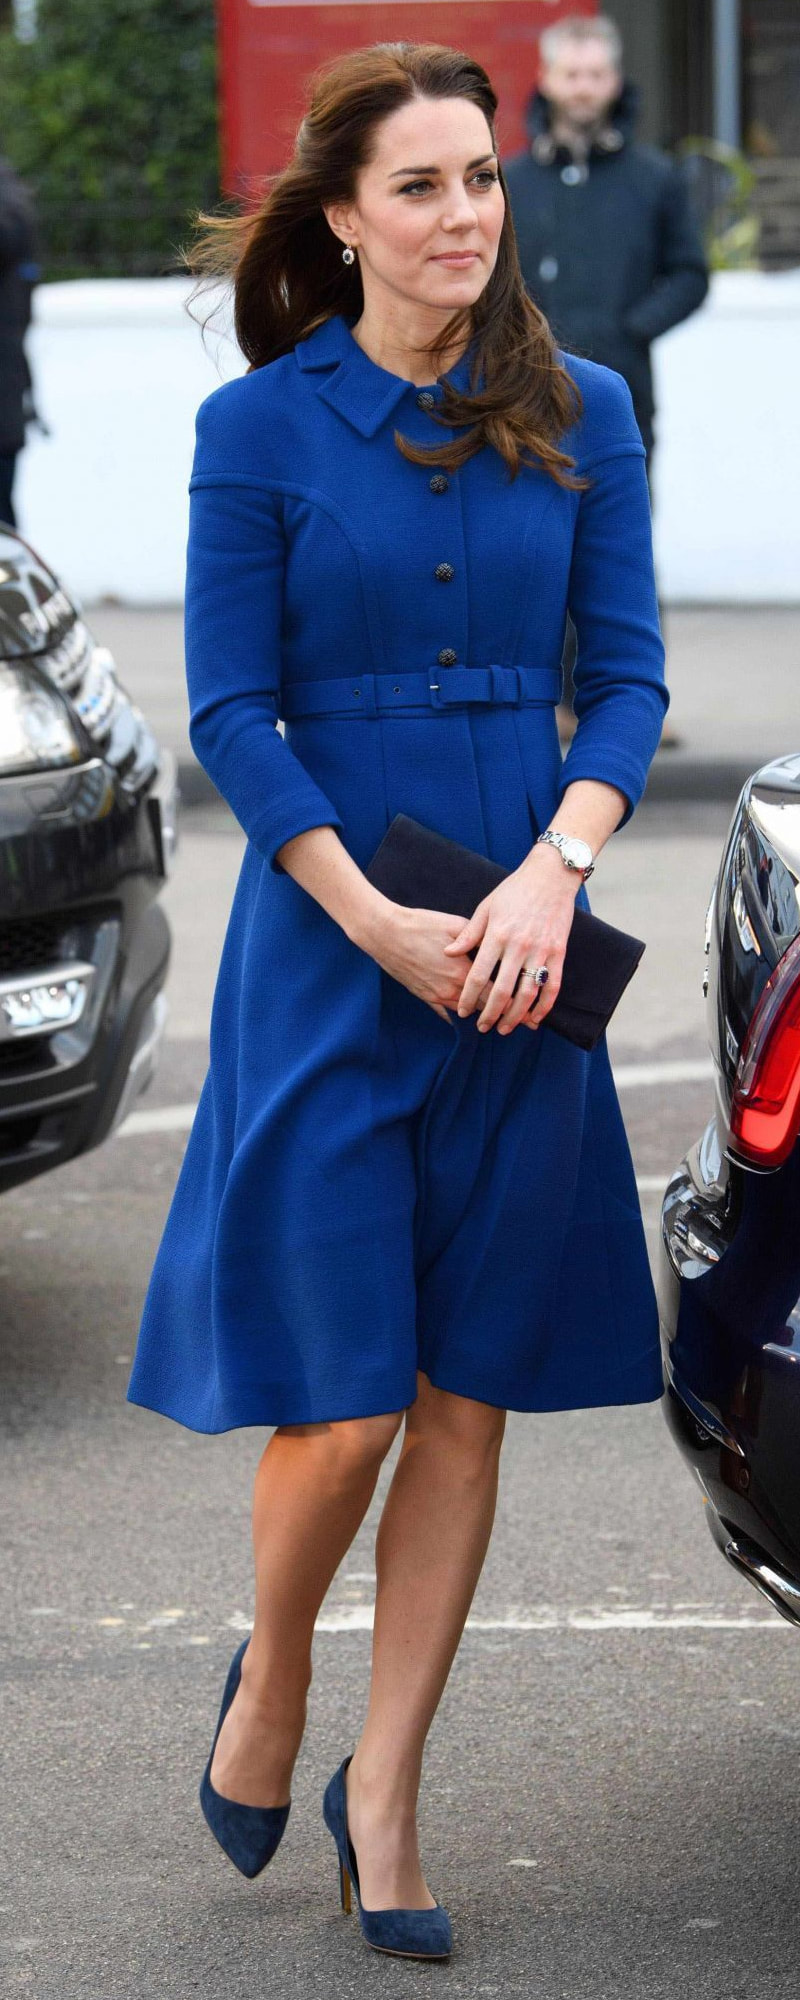 Eponine London Double Wool Crepe Belted Shirt Dress in Blue as seen on Kate Middleton, Duchess of Cambridge.